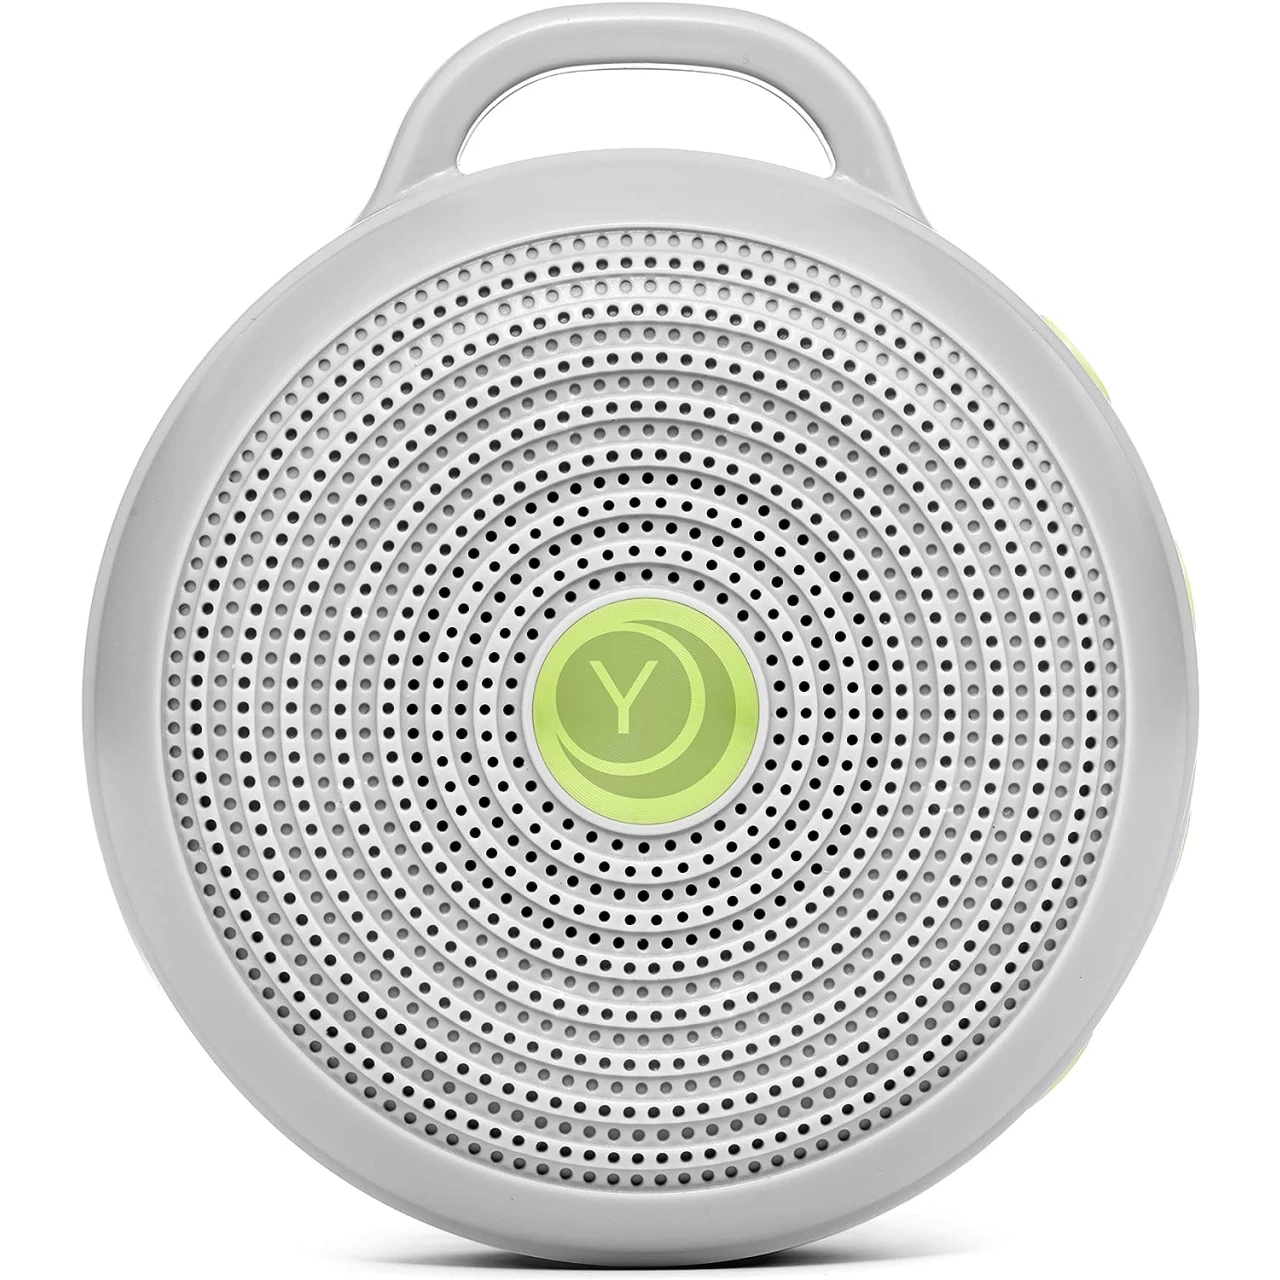 Yogasleep Hushh Portable White Noise Sound Machine For Baby, 3 Soothing Natural Sounds With Volume Control, Compact Size, Noise Canceling For Sleep Aid, Office Privacy, &amp; Meditation, Registry Gift